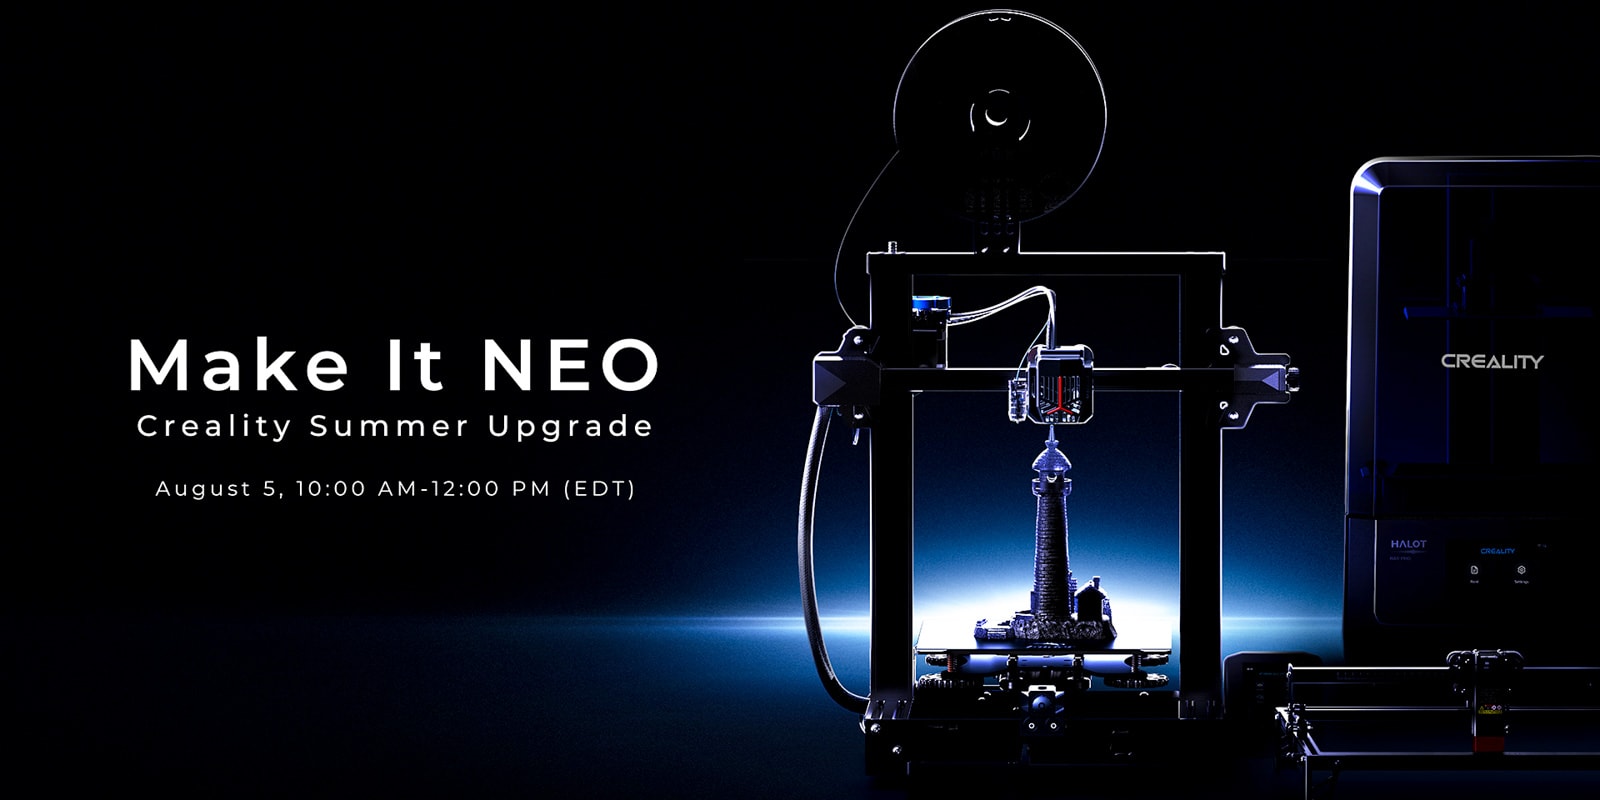 Creality announces its HALOT-RAY and Ender 3 Neo series